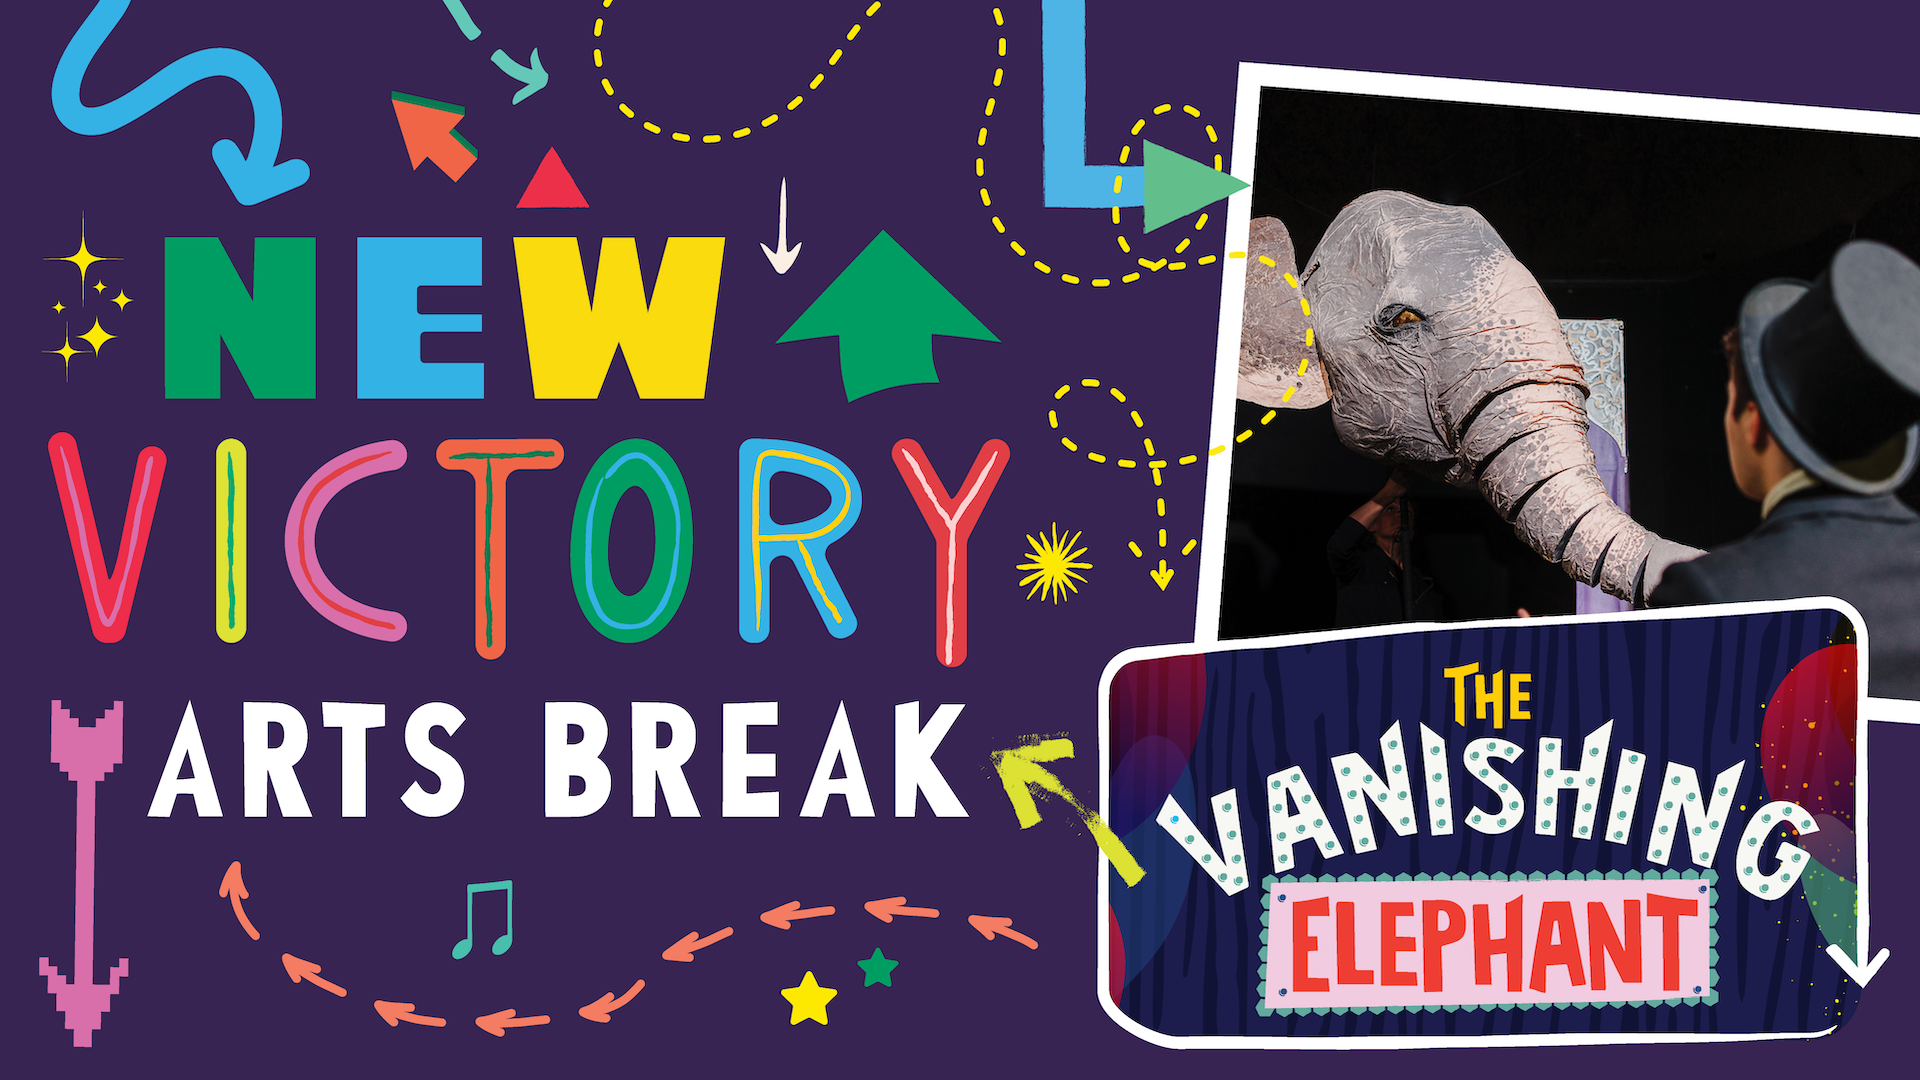 New Victory Arts Break: The Vanishing Elephant, with a photo of a large elephant puppet facing a man in a top hat